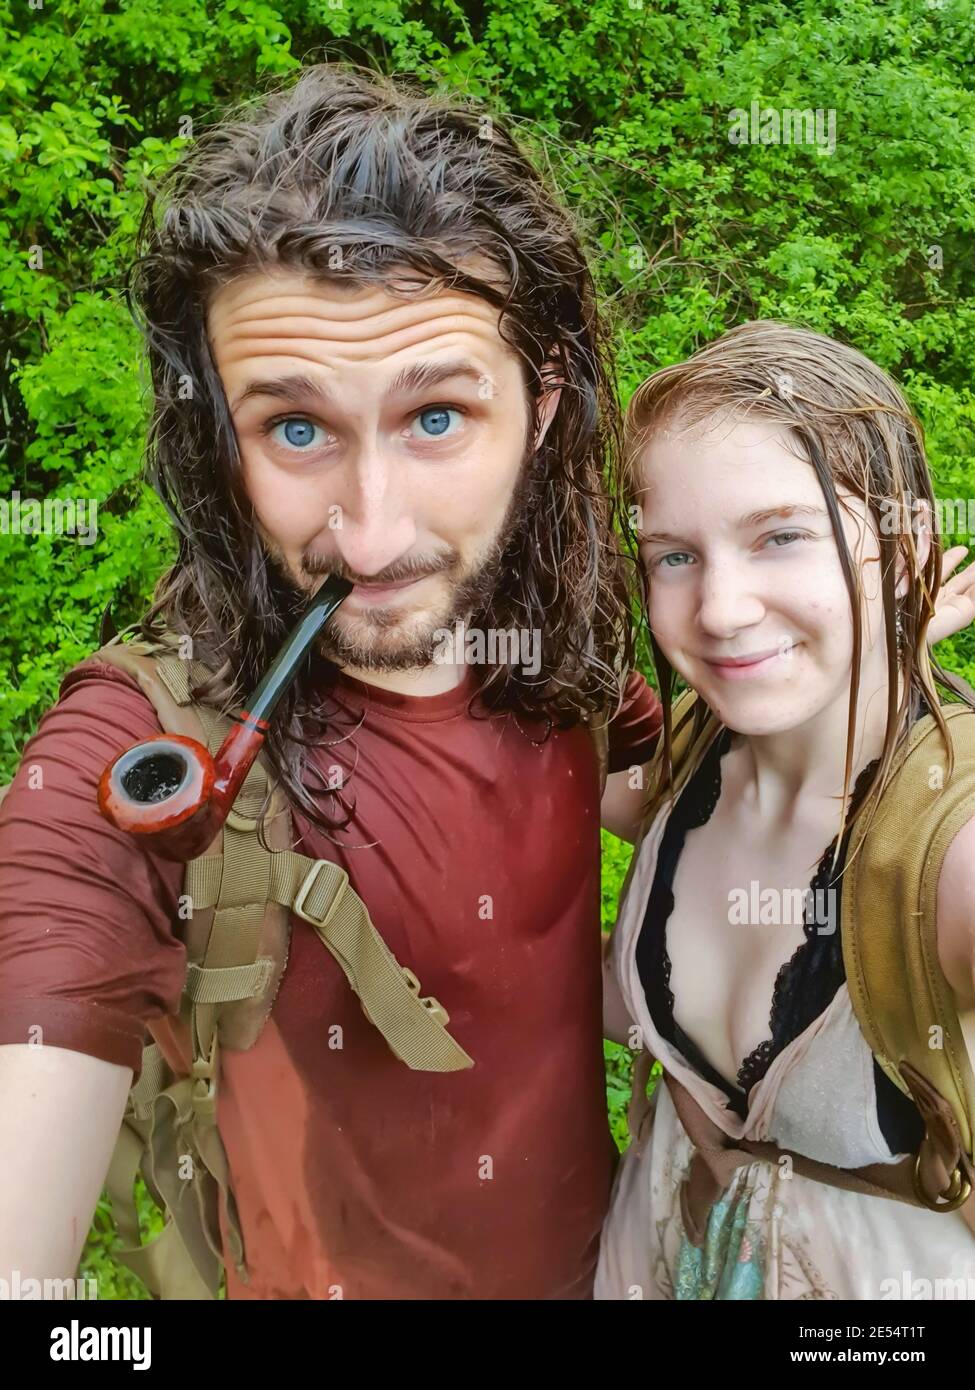 Selfie shot of a young couple drenched wet from a sudden rain in the middle of a hike in the forest, smiling at camera and the guy smoking a pipe. Stock Photo